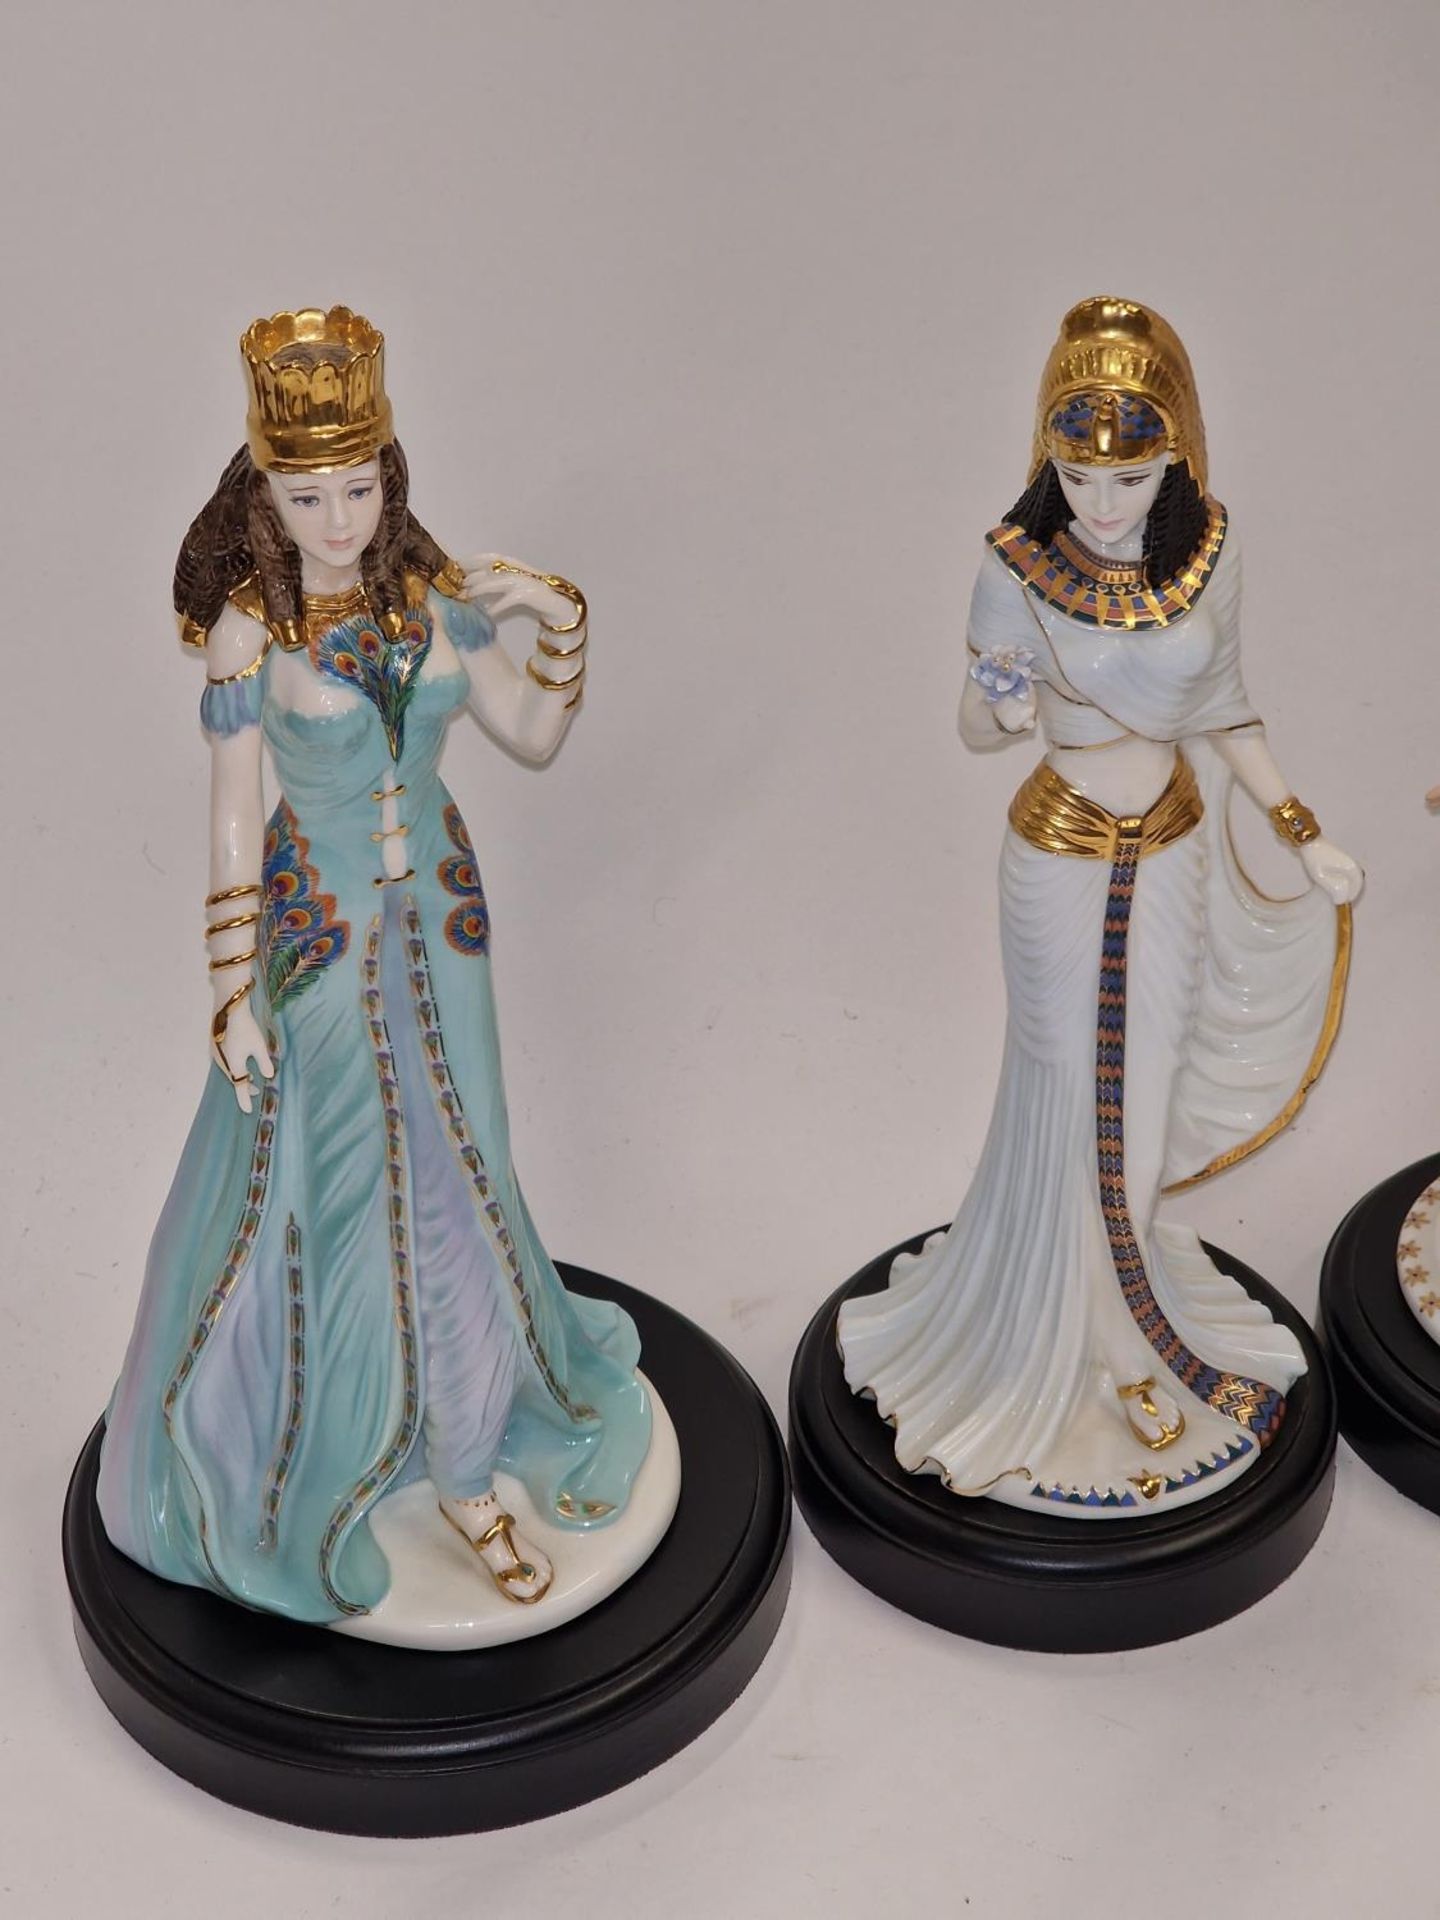 Coalport limited edition collection of David Cornell figurines on wooden bases (5). - Image 2 of 5